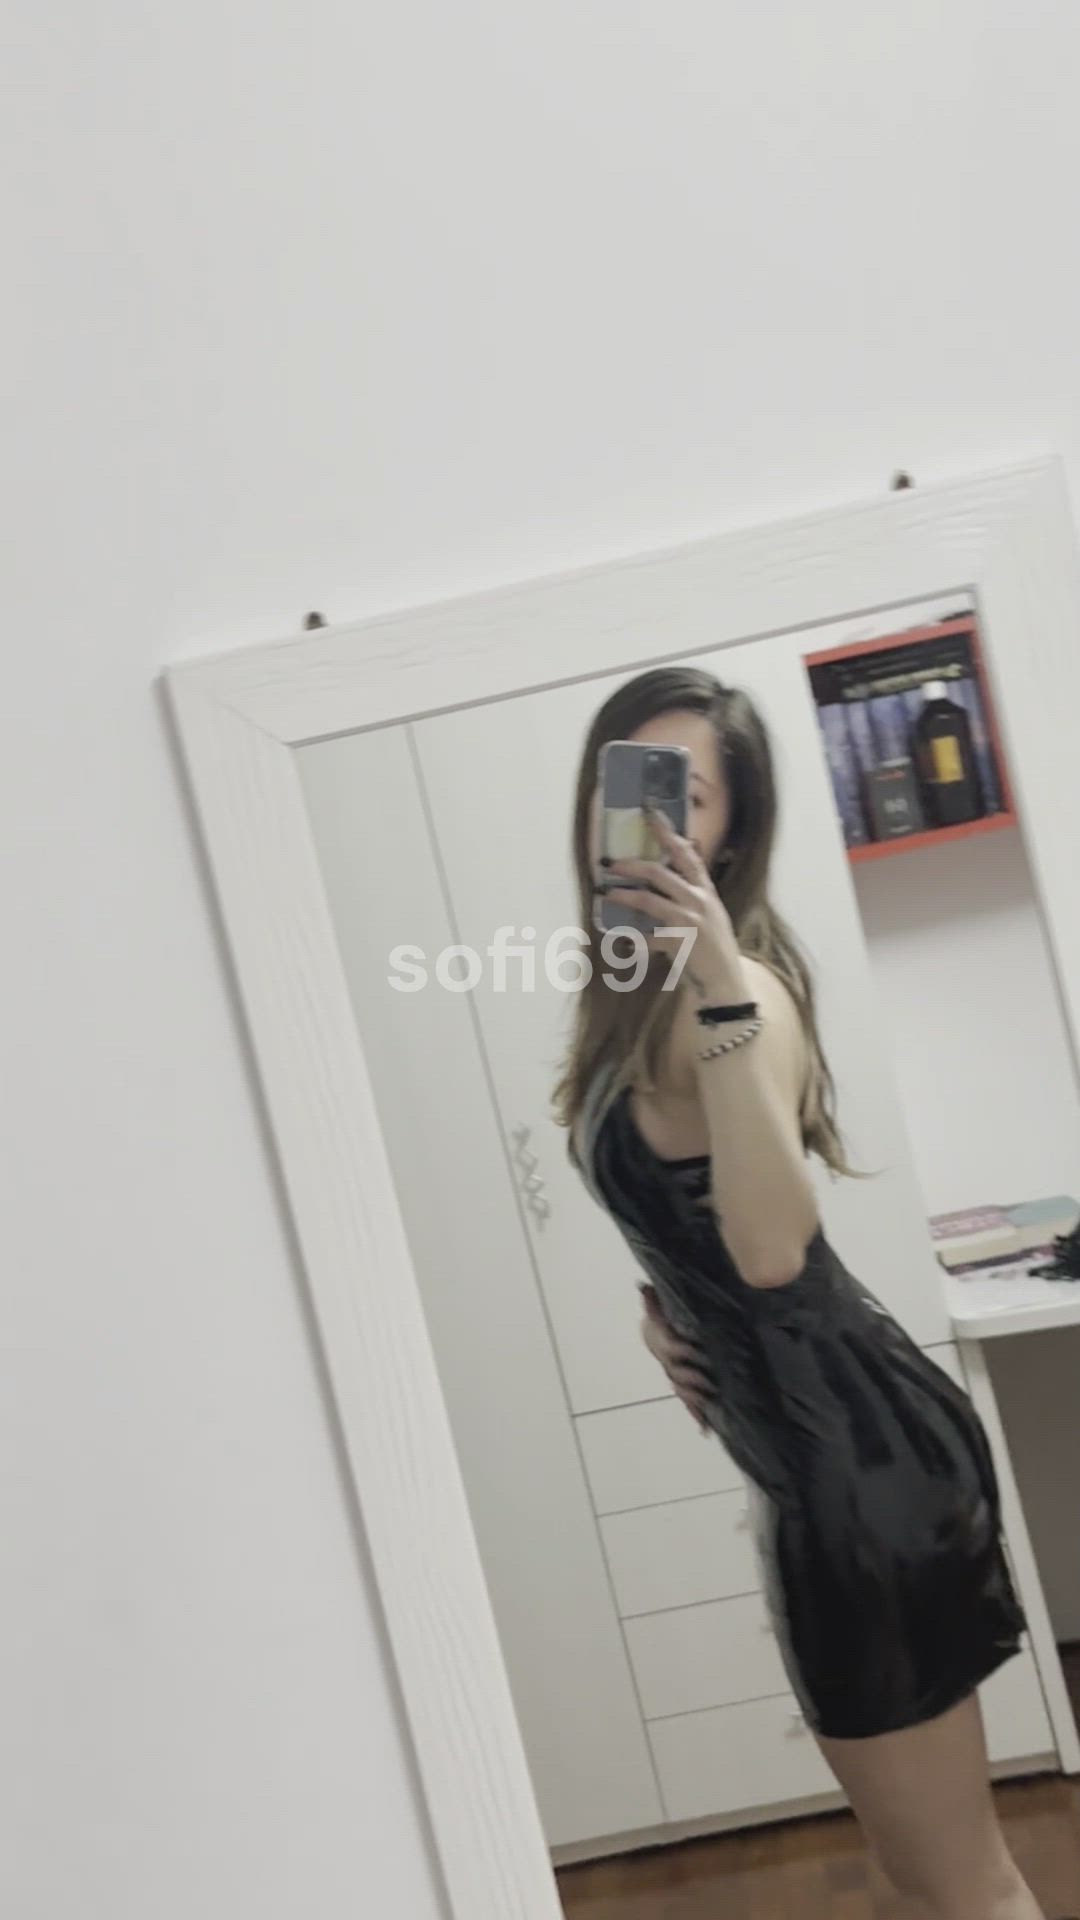 Ass porn video with onlyfans model sofi697 <strong>@sofi697</strong>